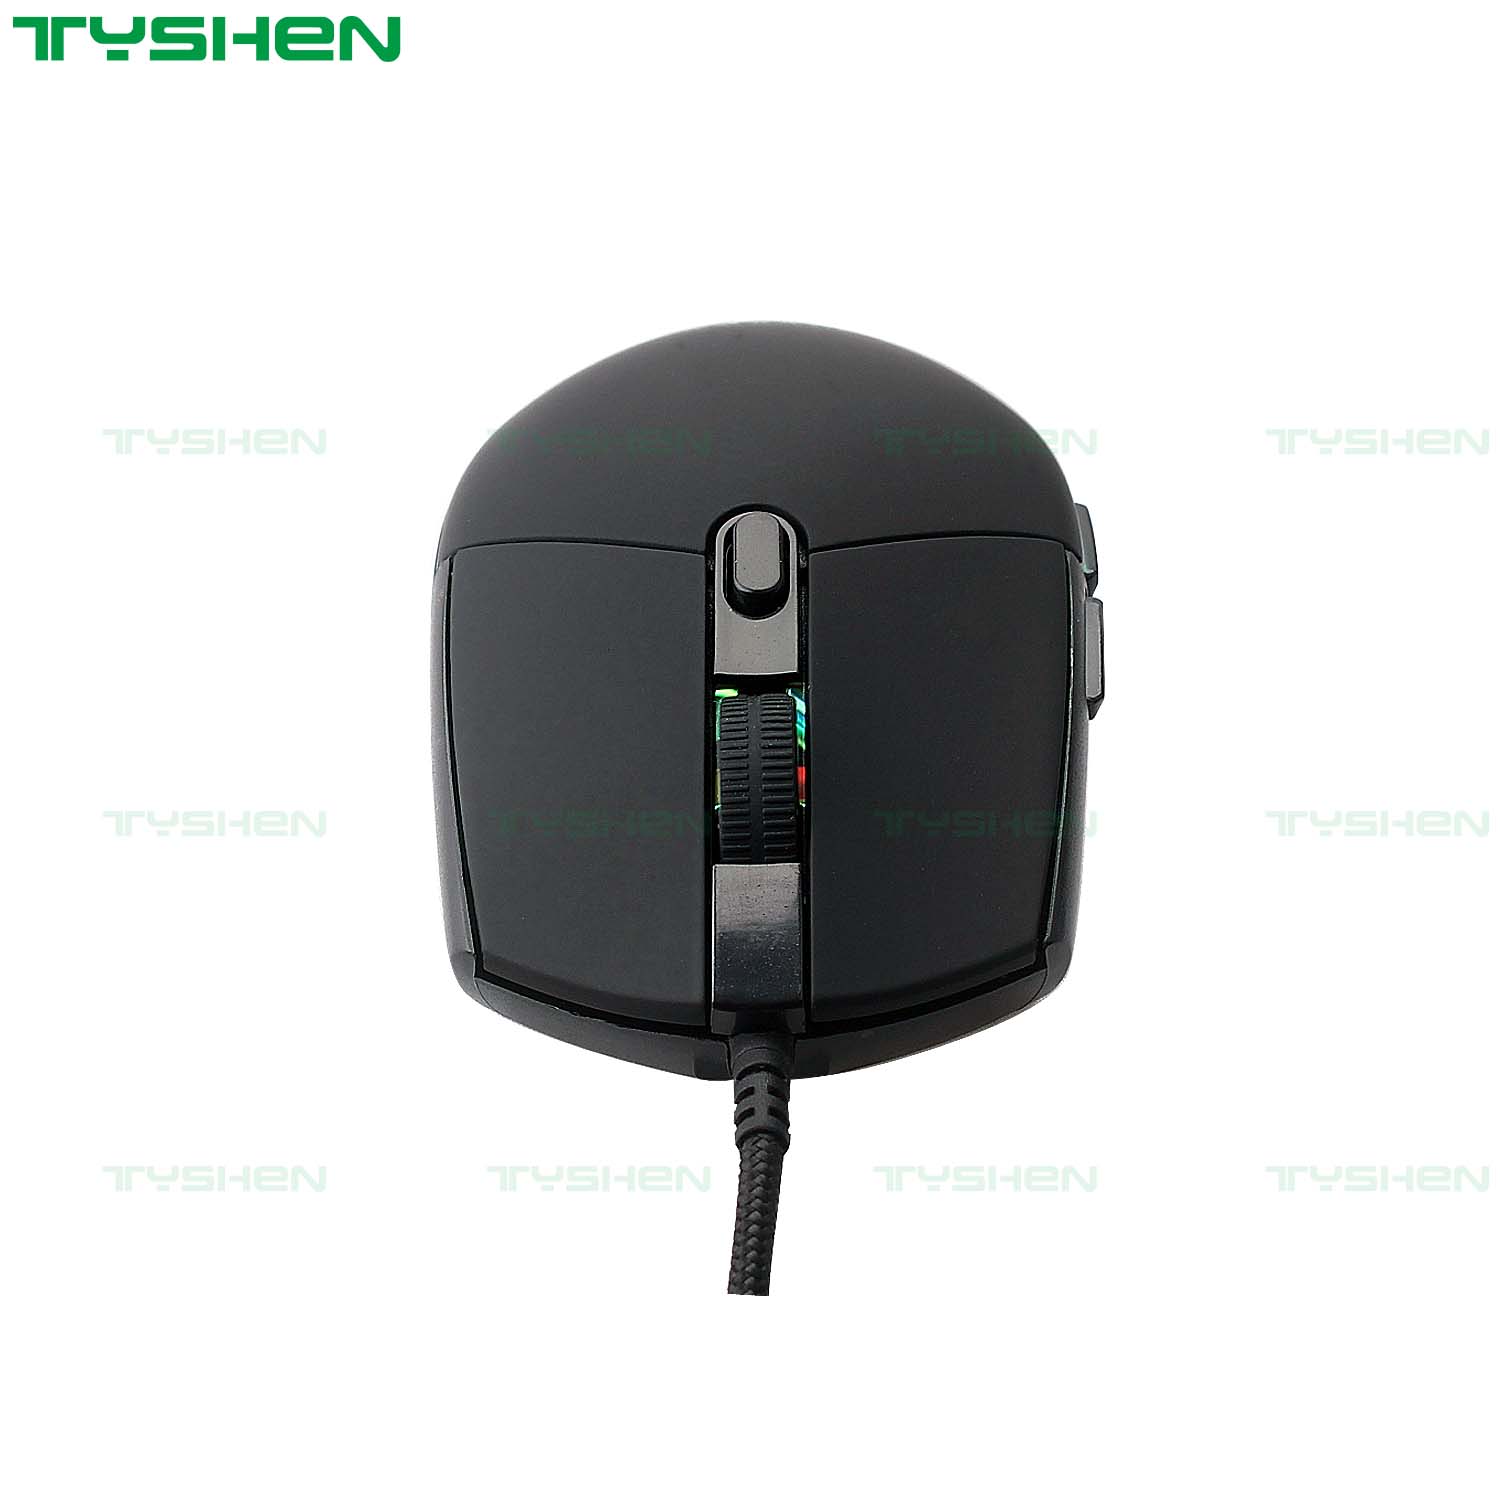 Factory OEM Cheapest Computer Optical Colored 6D 6 Button USB Wired Gaming Mouse